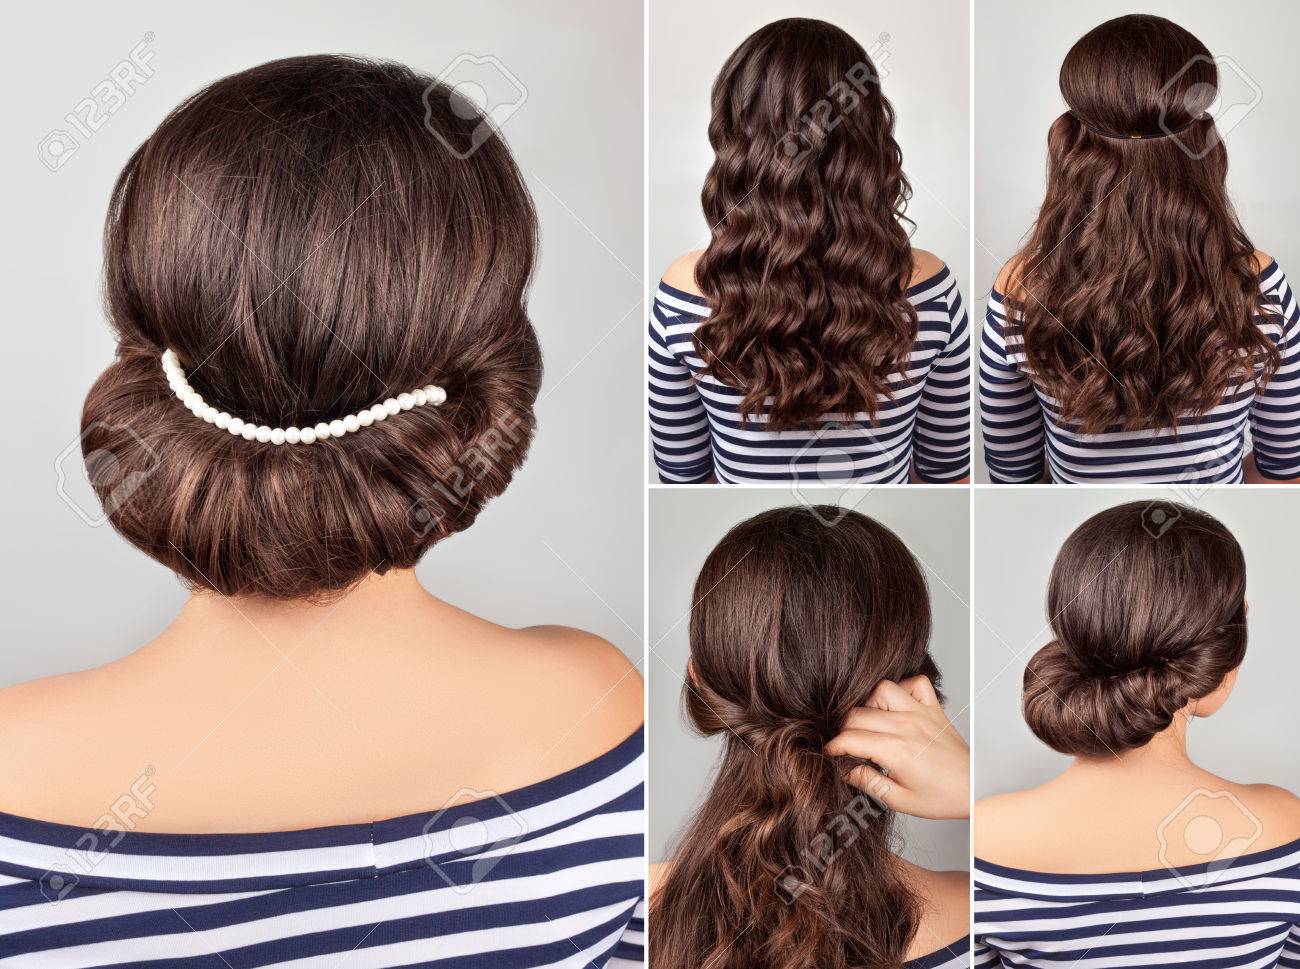 greek style hairdo with string of pearls tutorial. Hairstyle for long hair.  Sea style